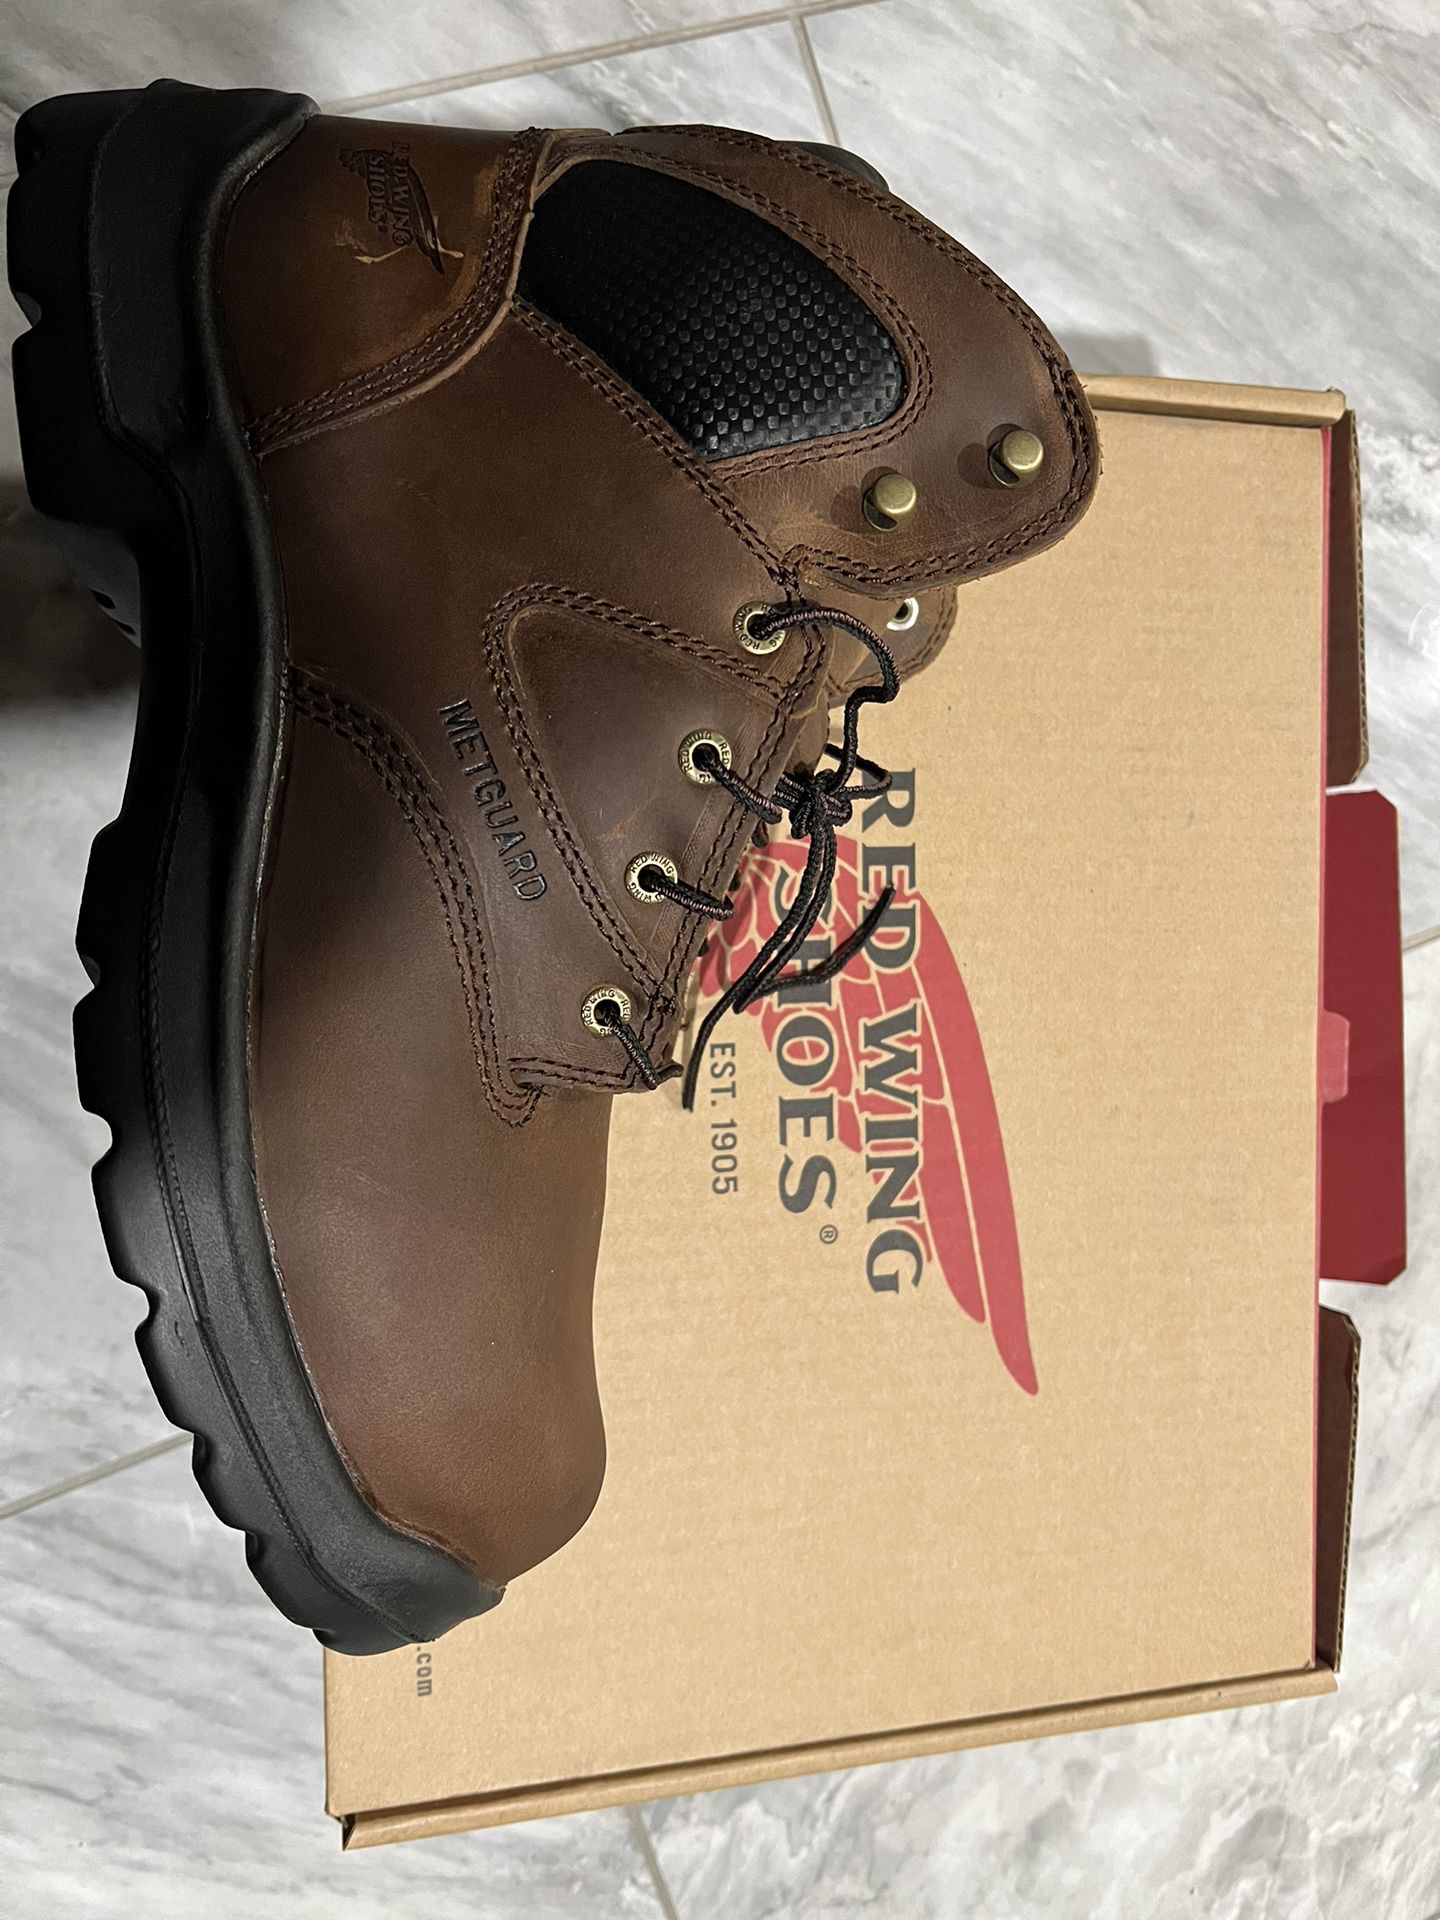 Red Wings Work Boots